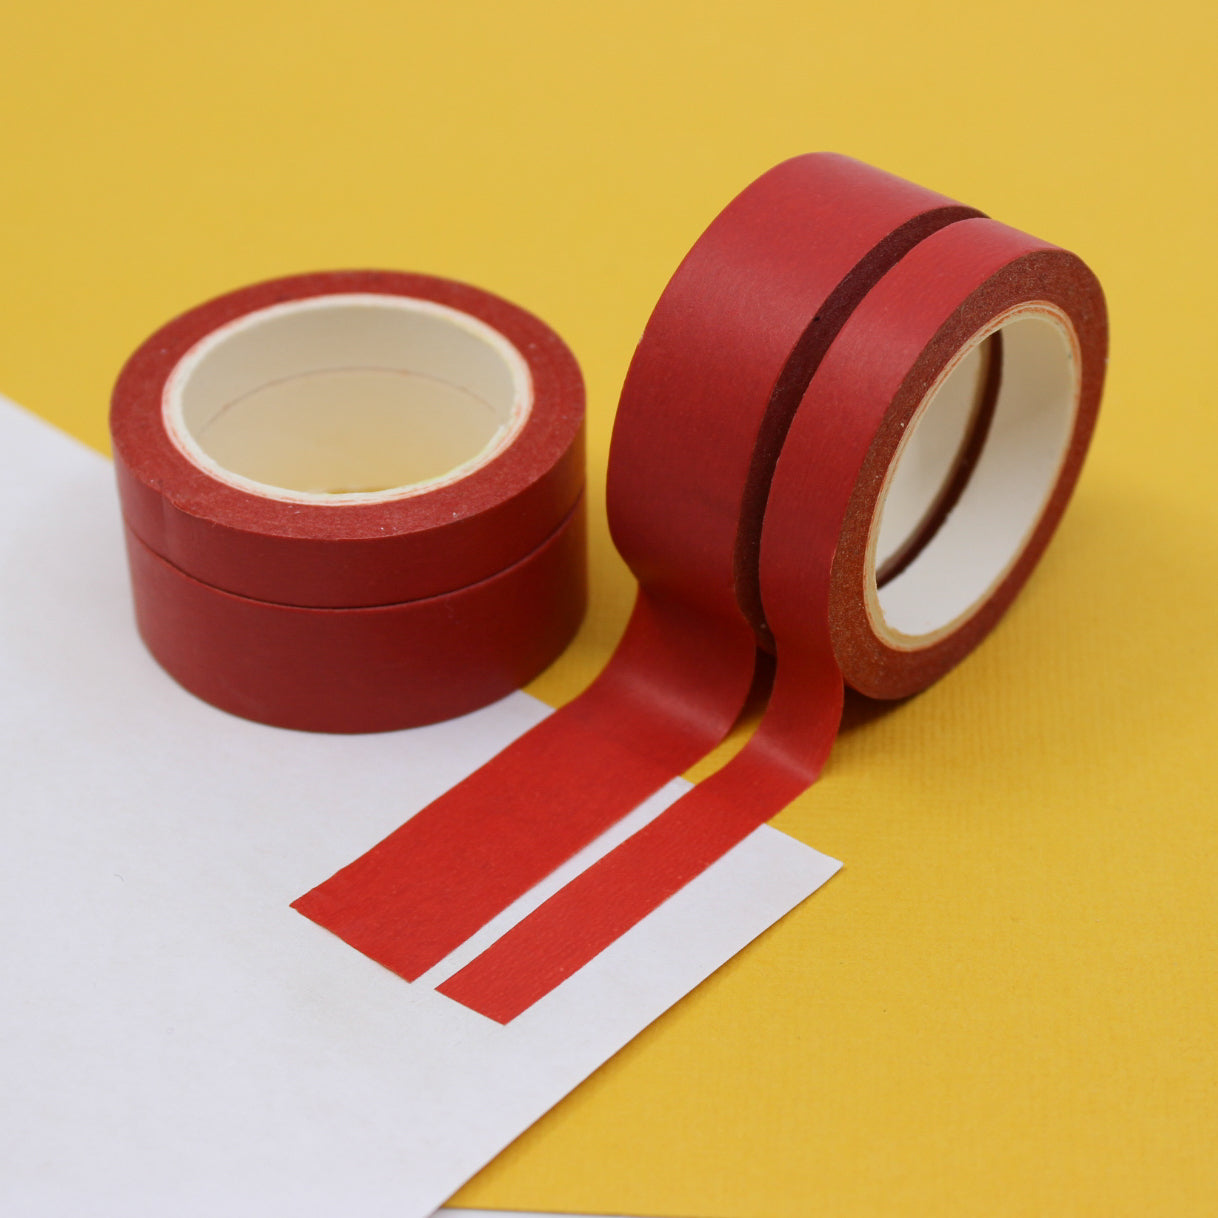 This primary red washi tape is vibrant and fun. This washi tape is part of our solid neon thick-thin matching duo washi collection. Find the perfect color for any project in BBB Supplies' thick-thin solids collection, from neon to neutral to pastel and more. This tape is sold at BBB Supplies Craft Shop.